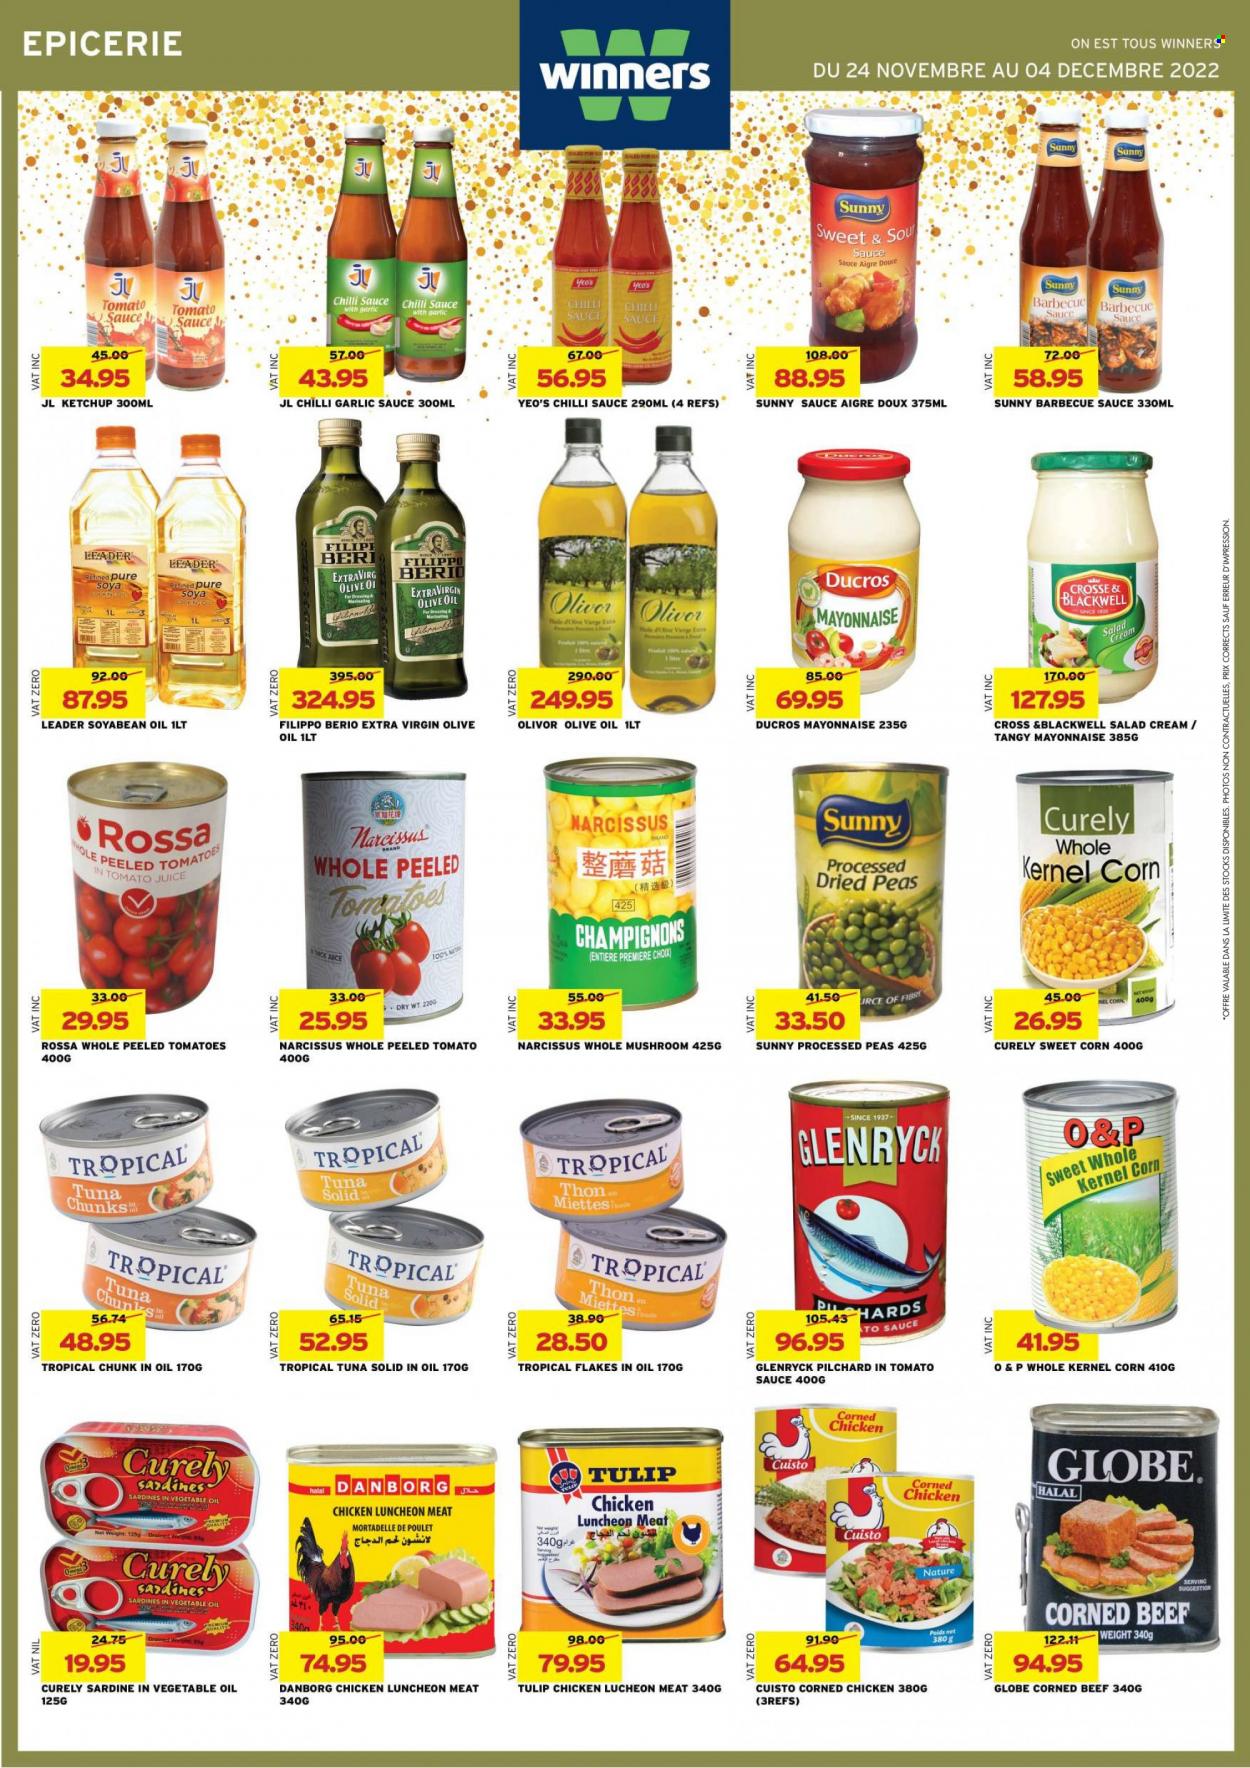 thumbnail - Winner's Catalogue - 24.11.2022 - 4.12.2022 - Sales products - mushrooms, corn, tomatoes, peas, sweet corn, sardines, tuna, lunch meat, corned beef, mayonnaise, salad cream, BBQ sauce, chilli sauce, dressing, garlic sauce, extra virgin olive oil, olive oil, tomato juice, beef meat, PREMIERE, ketchup. Page 29.